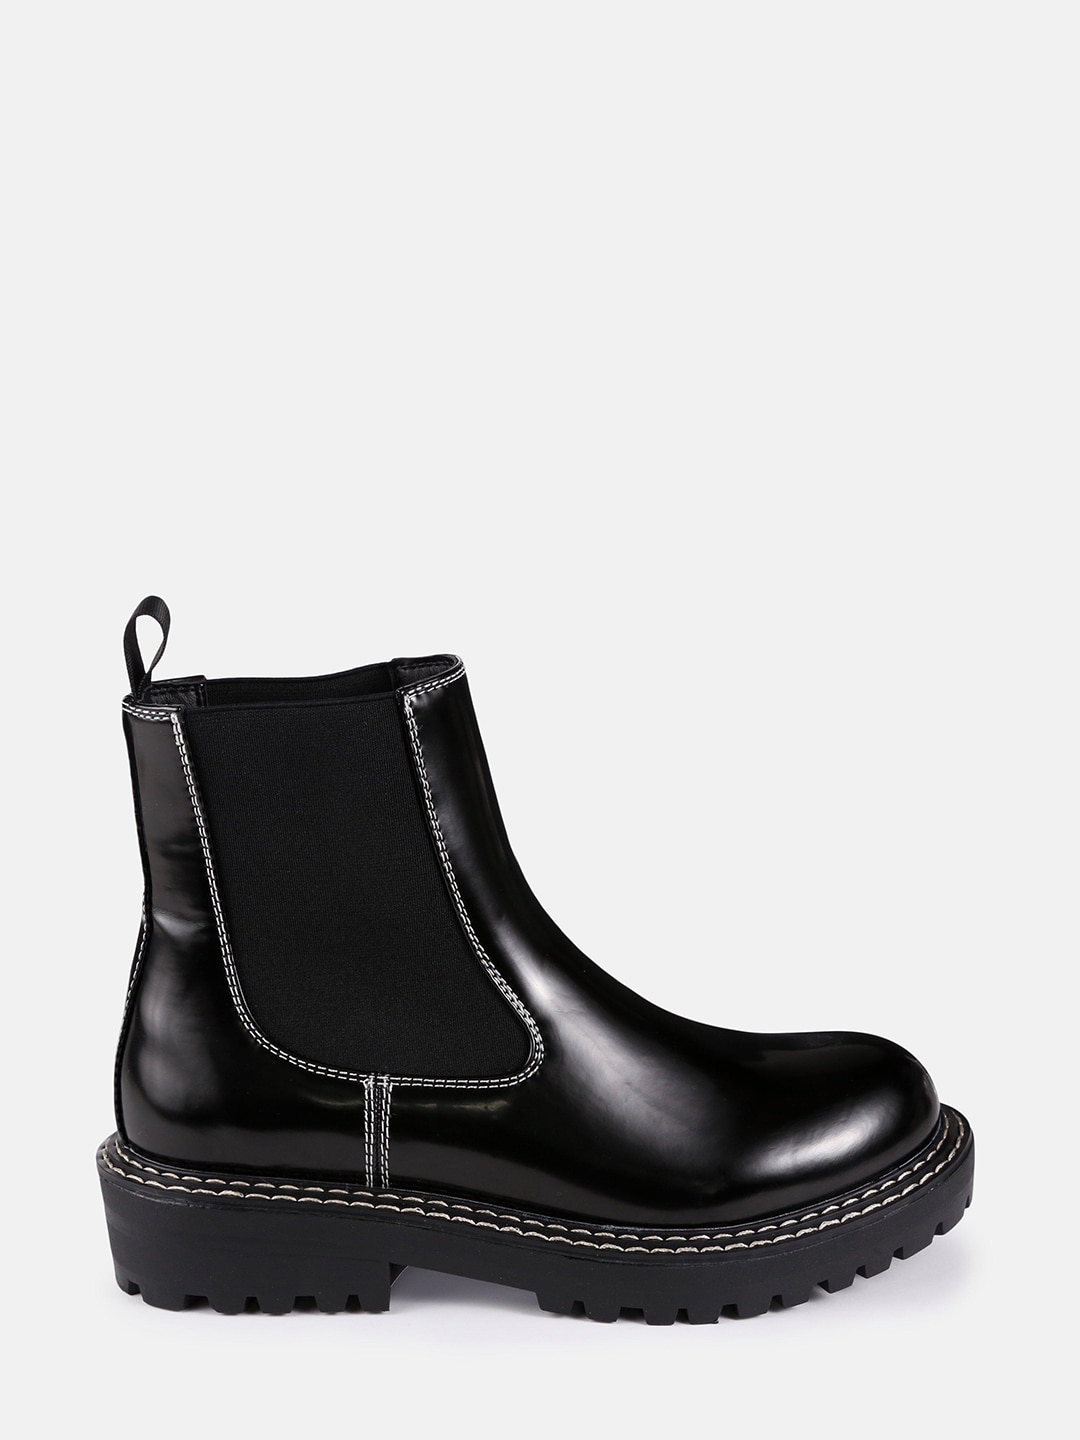 Missguided Women Black Solid Mid-Top Chelsea Boots Price in India